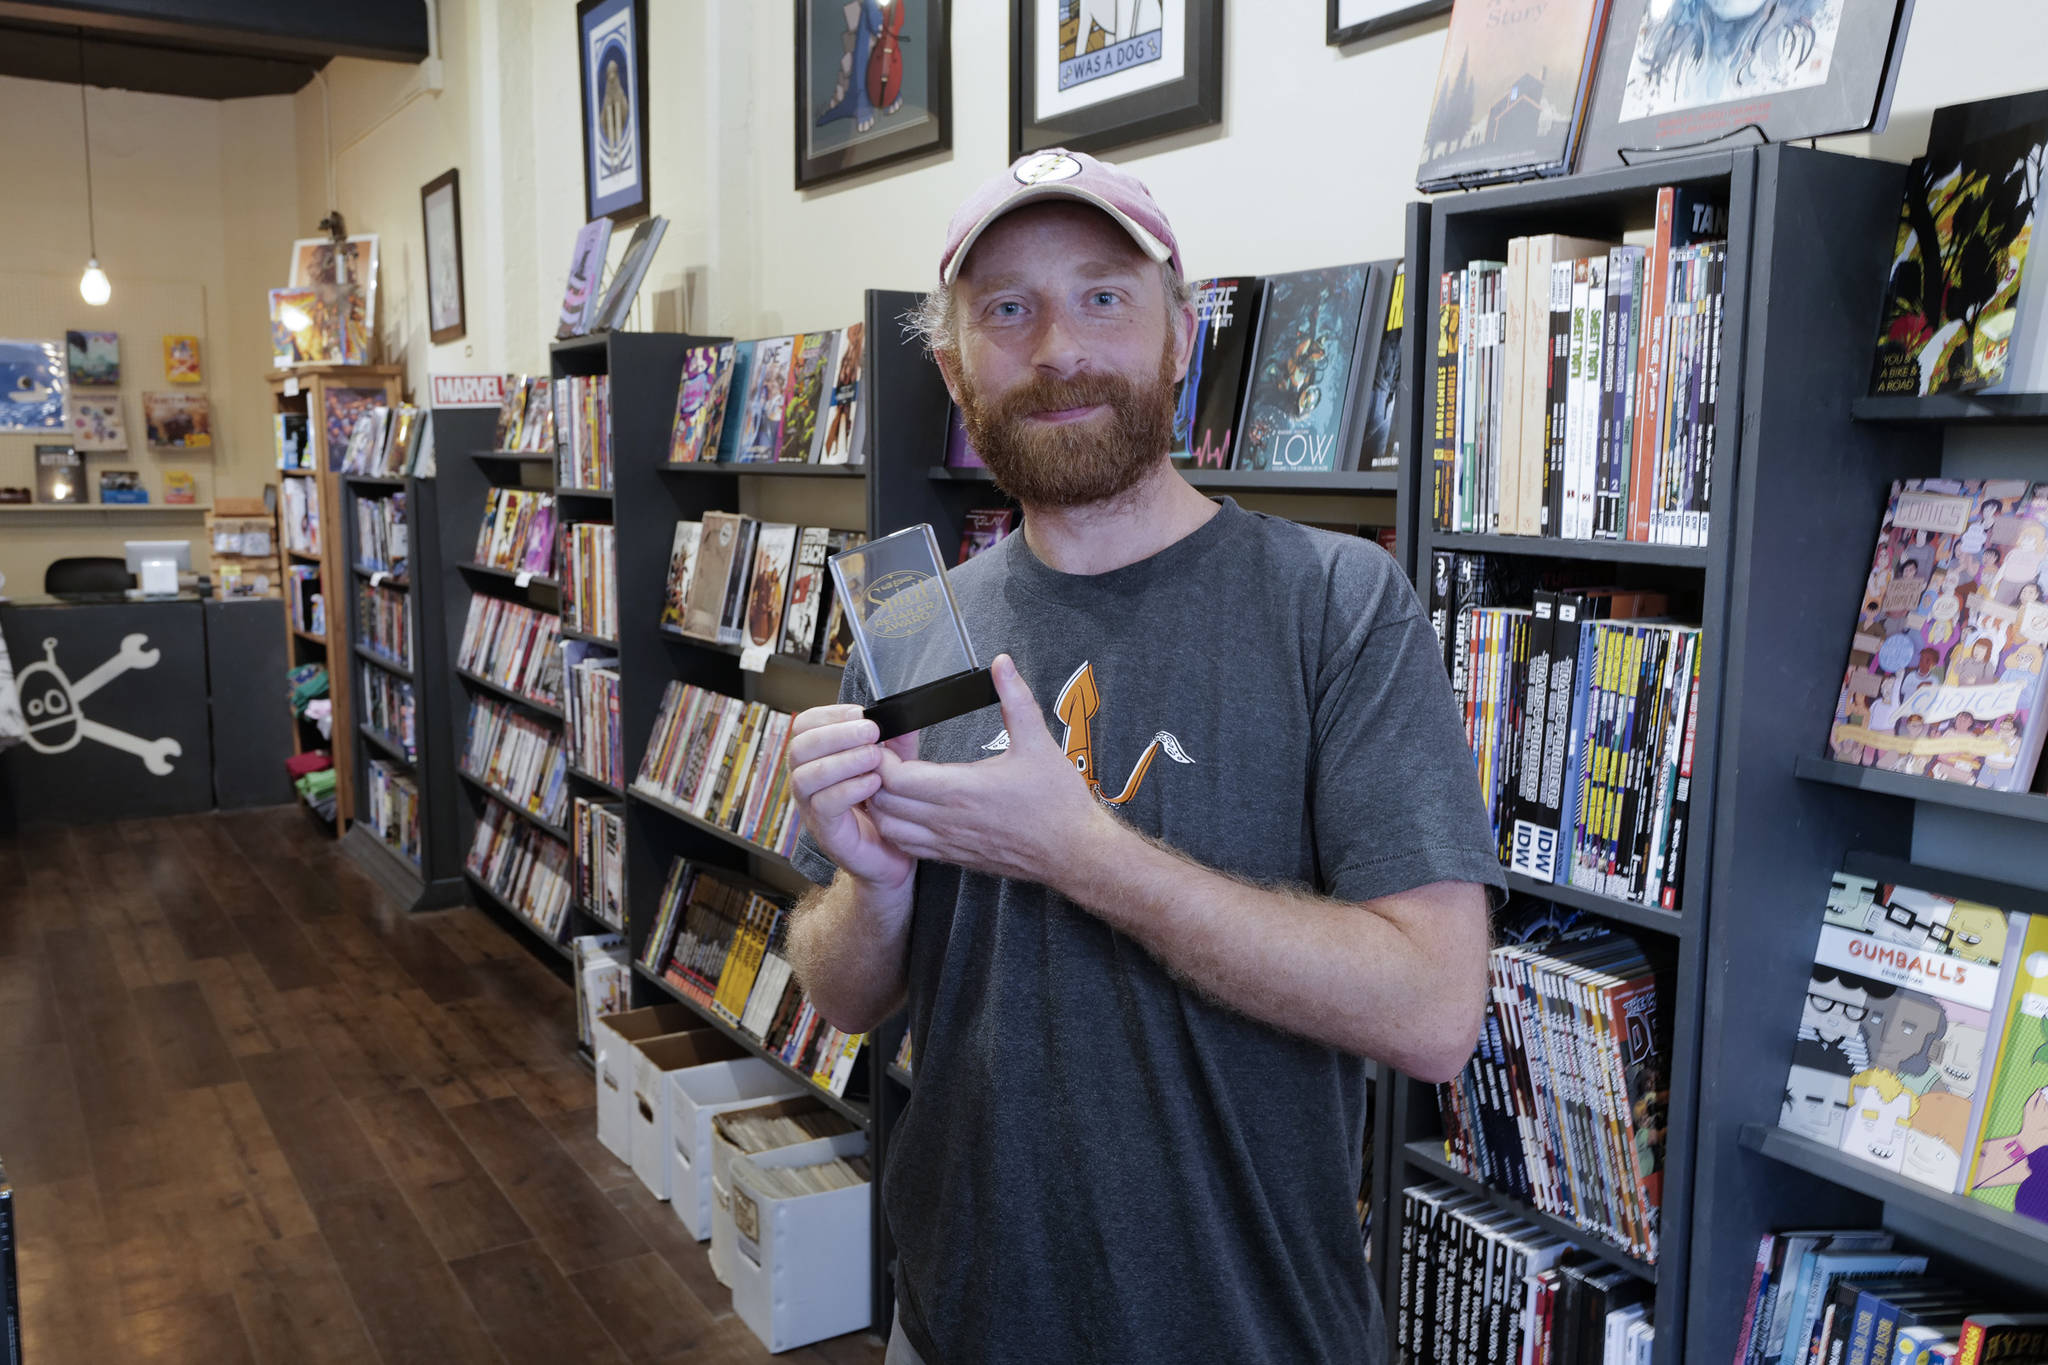 Pat Race displays the Will Eiser Spirit of Comics Retailer Award at his Alaska Robotic Gallery during First Friday on Friday in August. Race will be a featured artist for the upcoming Tidal Echoes art and literary journal. (Michael Penn | Juneau Empire File)